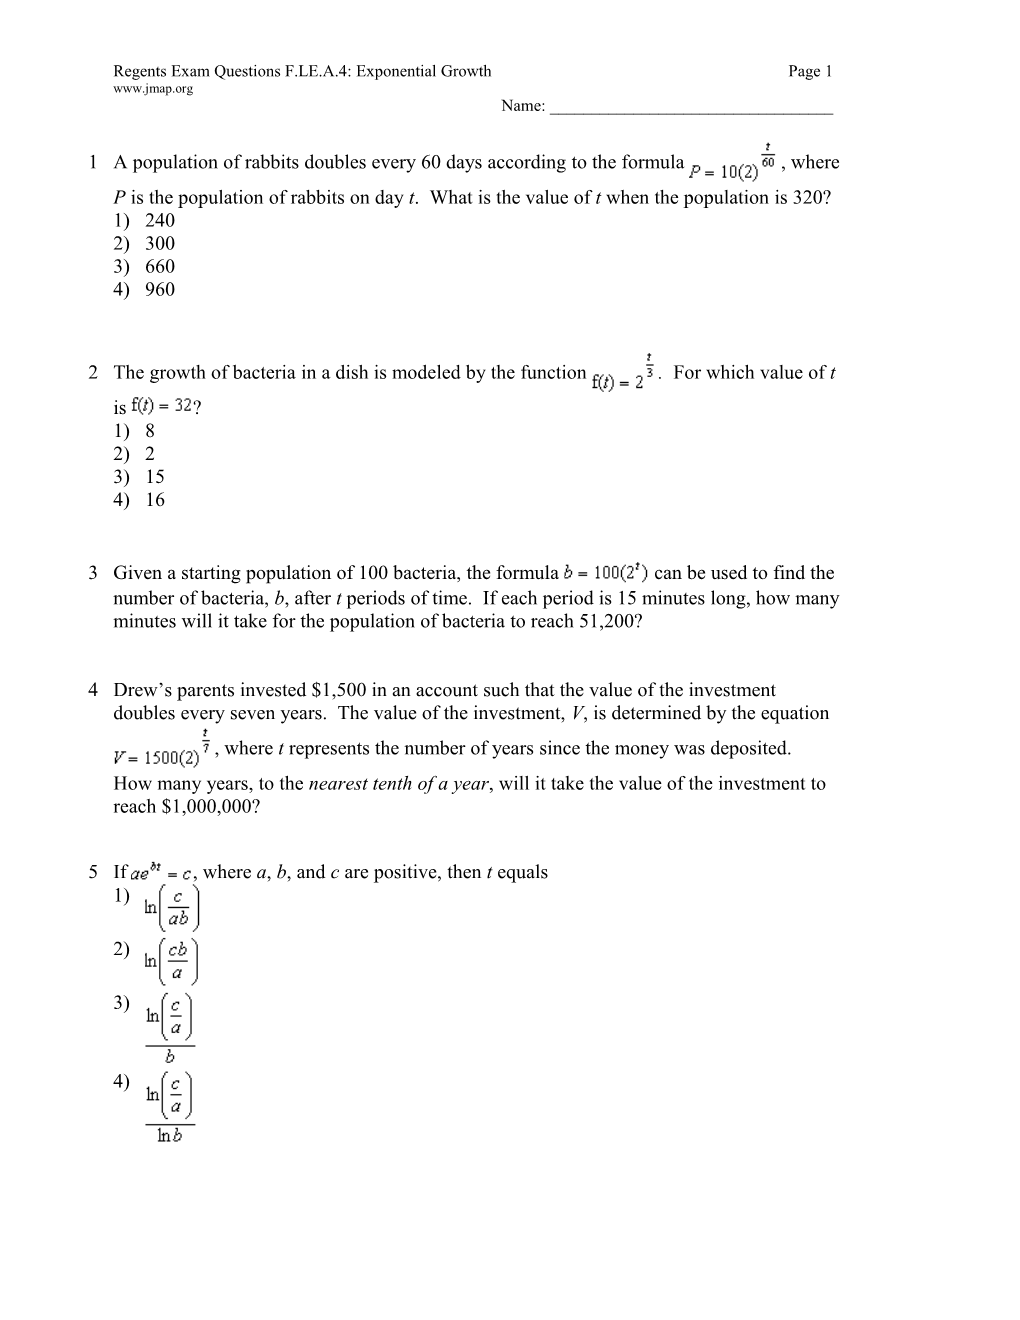 Regents Exam Questions F.LE.A.4: Exponential Growthpage 1